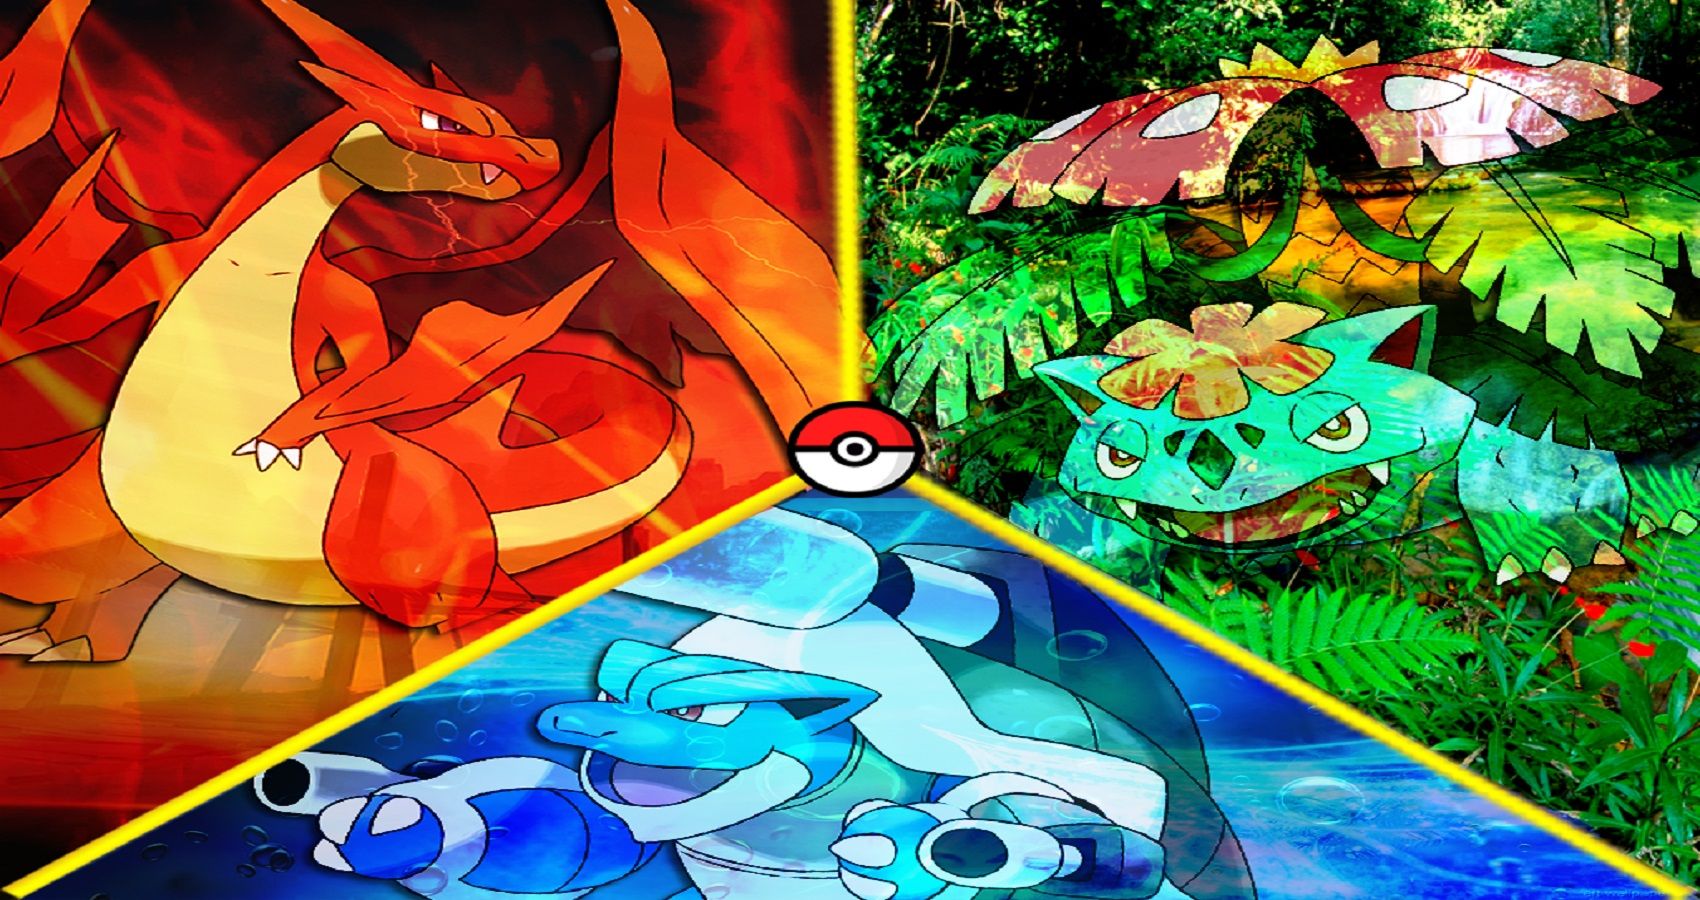 How to get a mega evolution stone in Pokemon FireRed - Quora